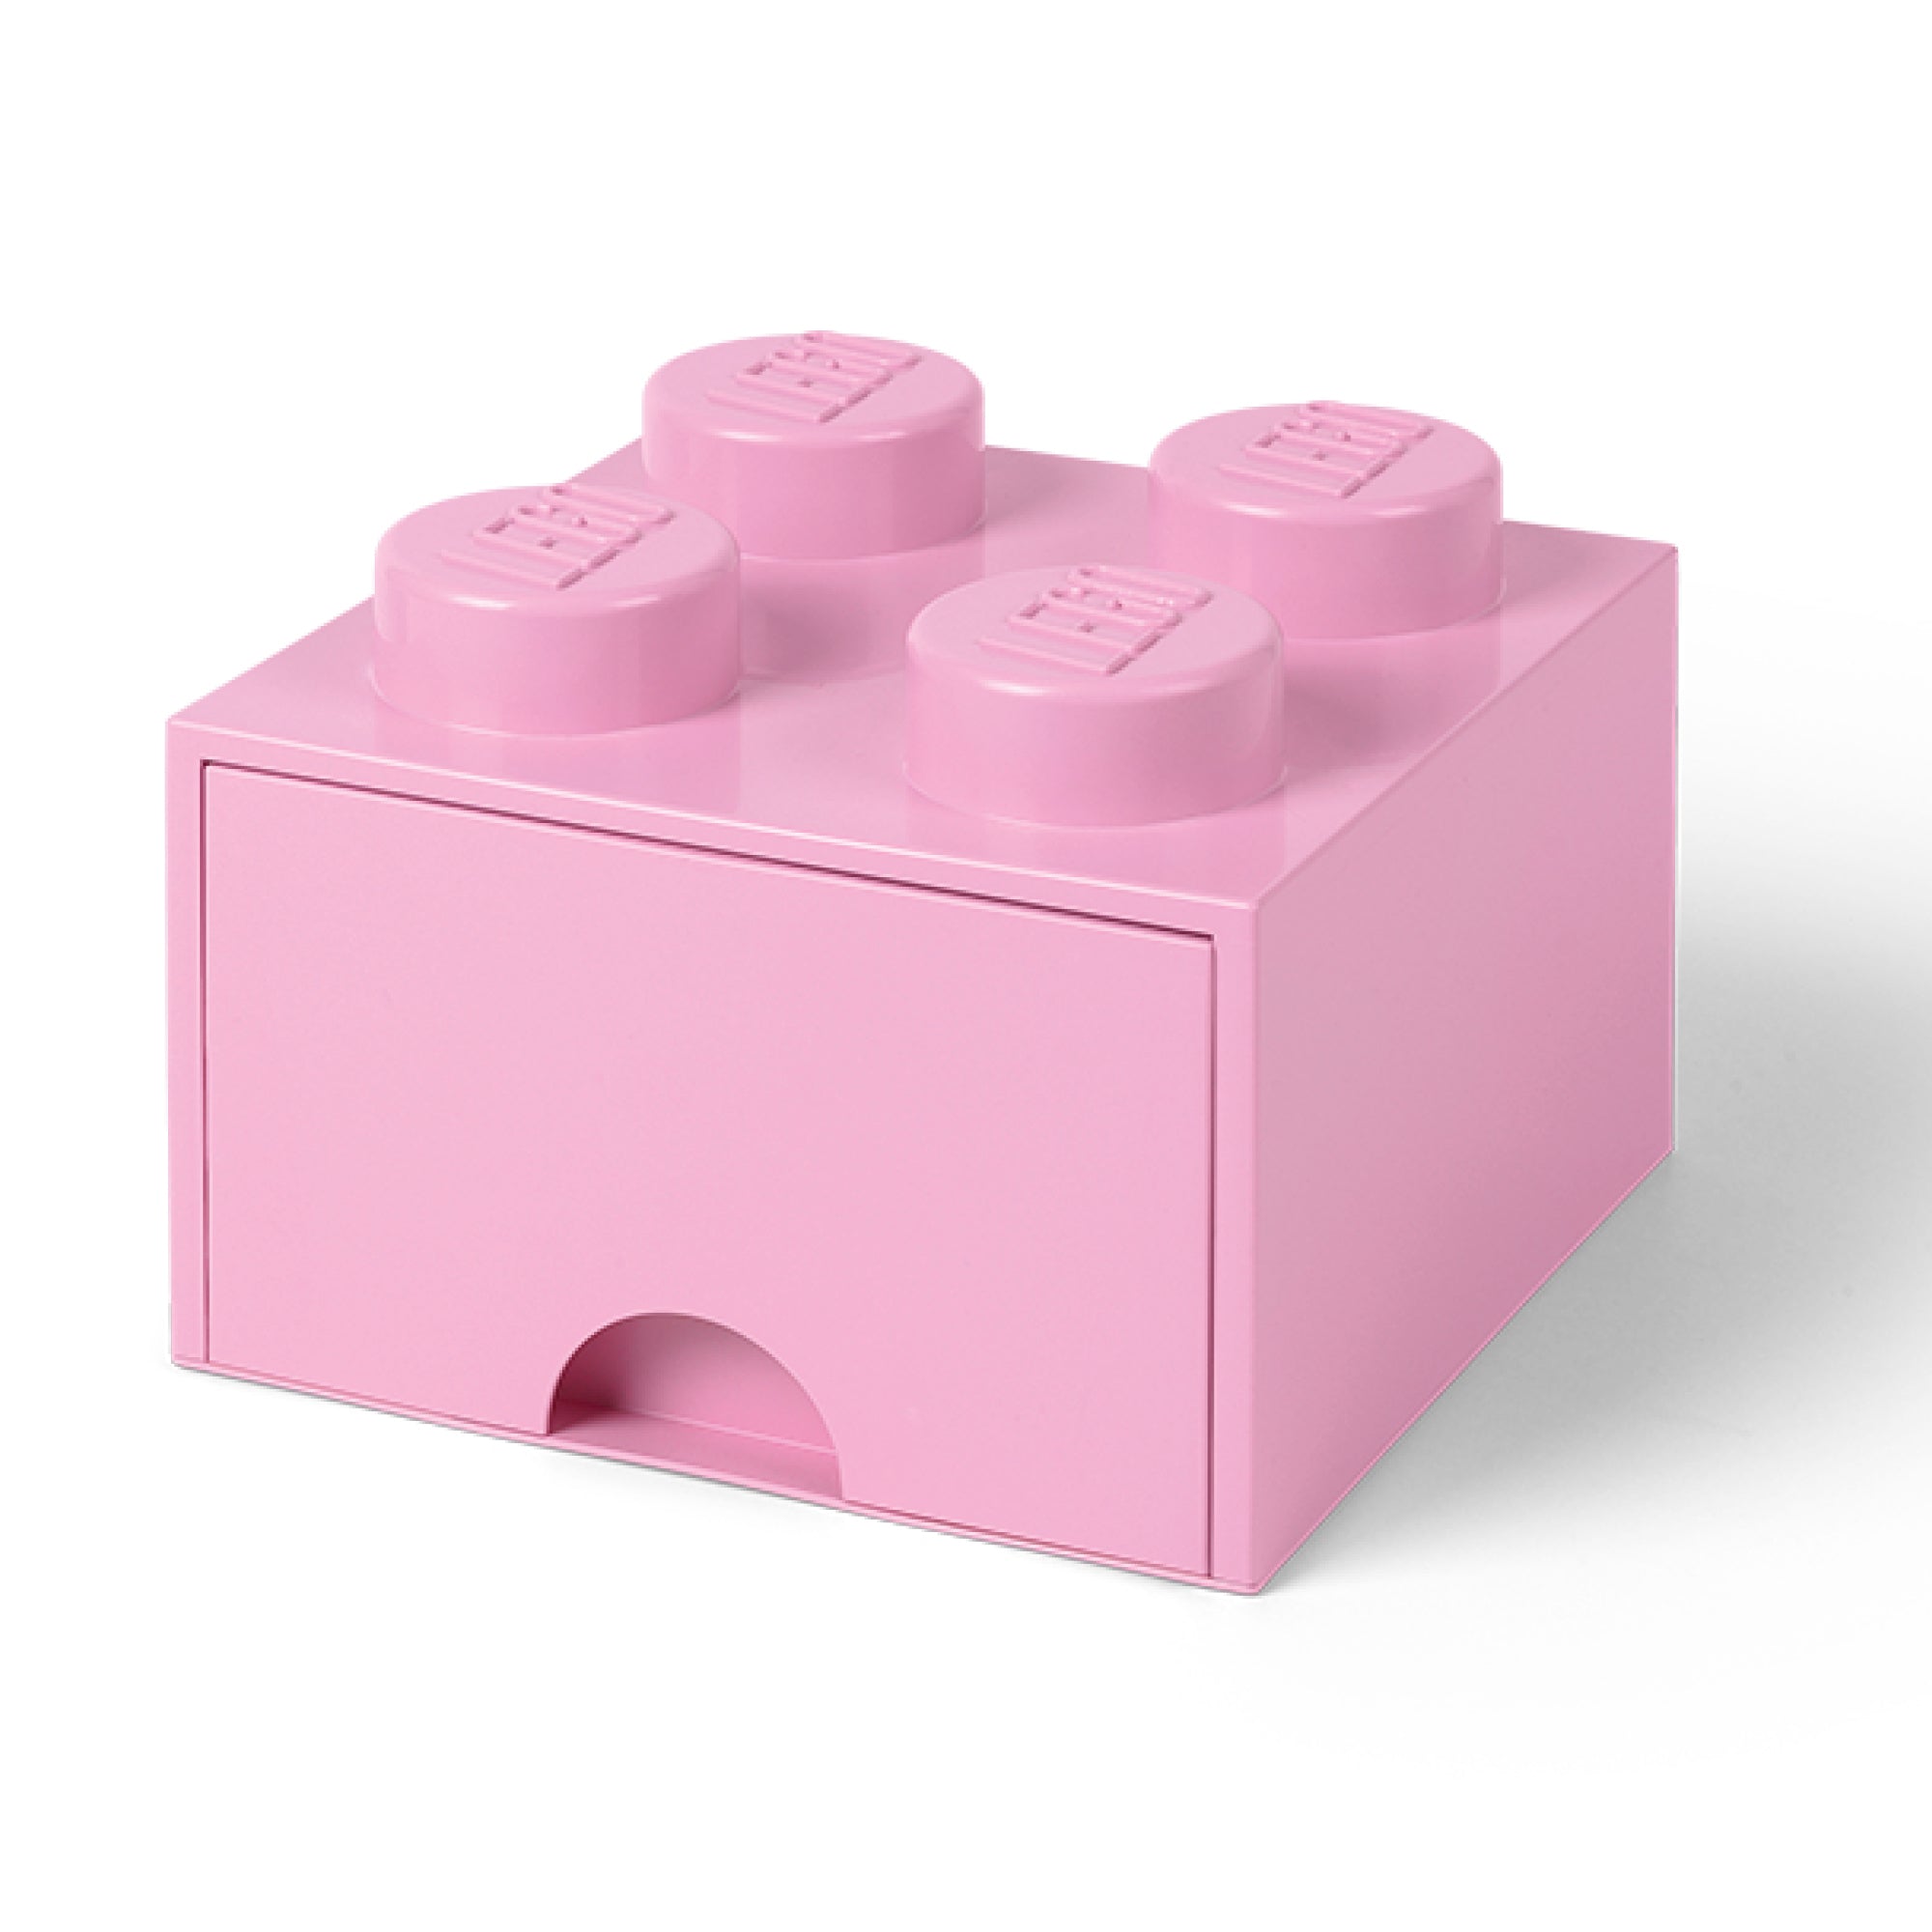  LEGO Box 4 Mini Box with 4 Buttons, Snack Box, Pink, 4.6 x 4.6  x 4.3 cm : Toys & Games